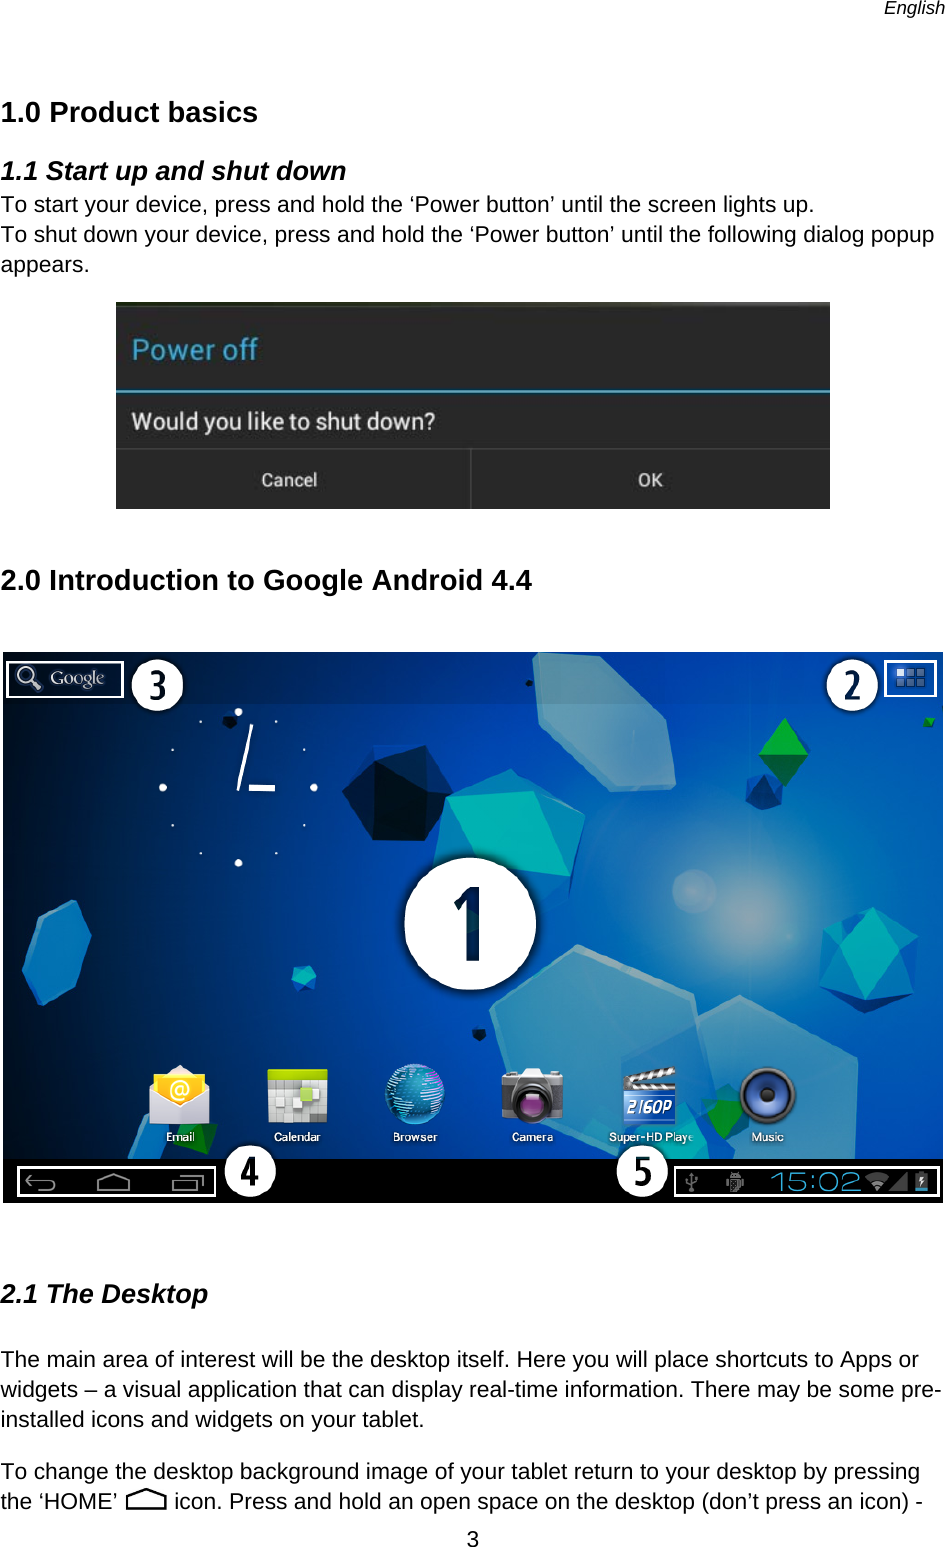   English   3  1.0 Product basics 1.1 Start up and shut down To start your device, press and hold the ‘Power button’ until the screen lights up.  To shut down your device, press and hold the ‘Power button’ until the following dialog popup appears.  2.0 Introduction to Google Android 4.4    2.1 The Desktop The main area of interest will be the desktop itself. Here you will place shortcuts to Apps or widgets – a visual application that can display real-time information. There may be some pre-installed icons and widgets on your tablet.  To change the desktop background image of your tablet return to your desktop by pressing the ‘HOME’   icon. Press and hold an open space on the desktop (don’t press an icon) - 